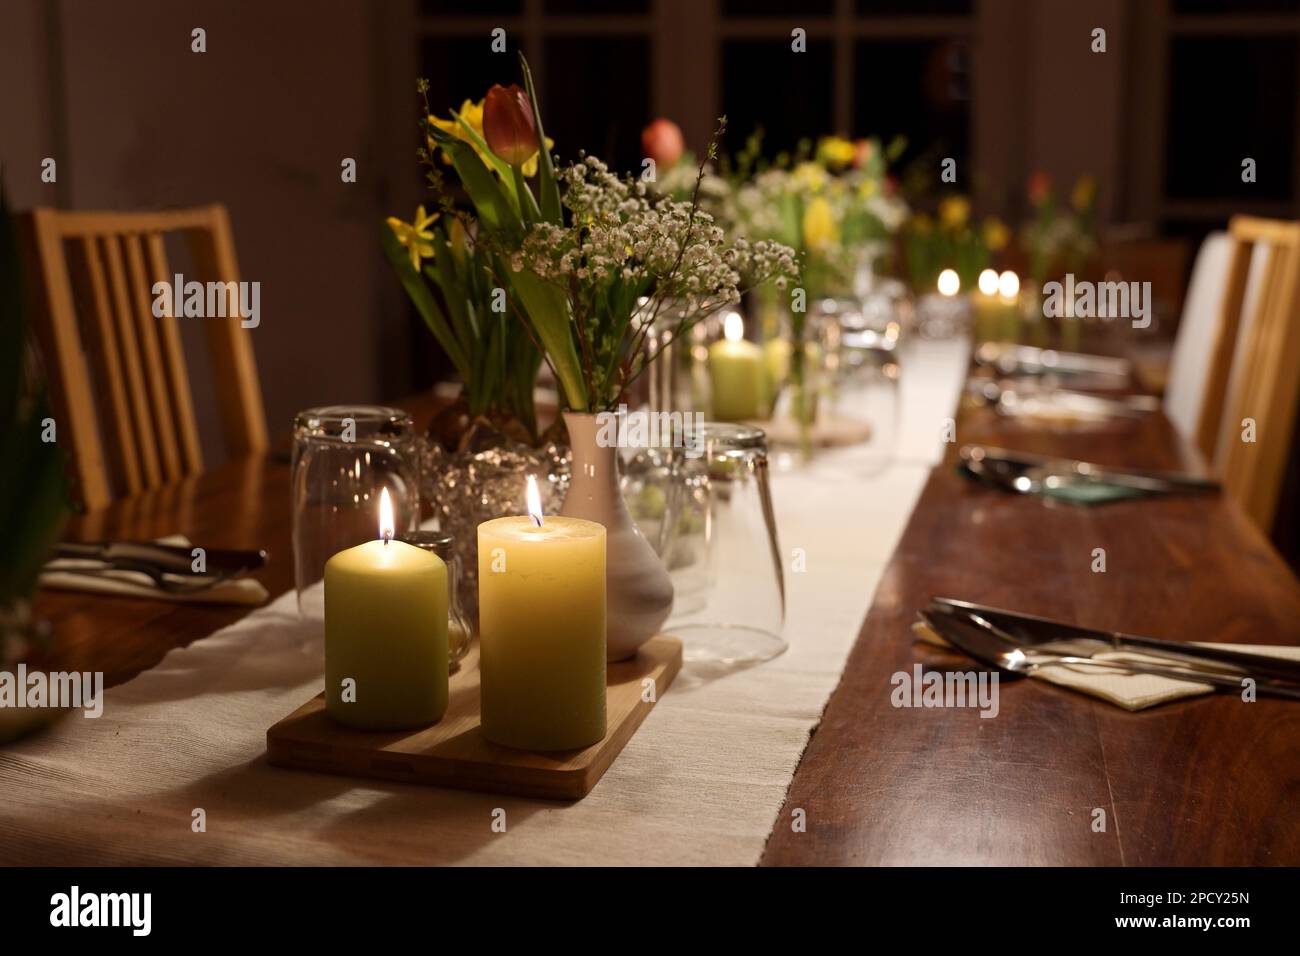 Table setting for a large dinner party with family and friends decorated with candles, spring flowers and various drinking glasses at night, selected Stock Photo